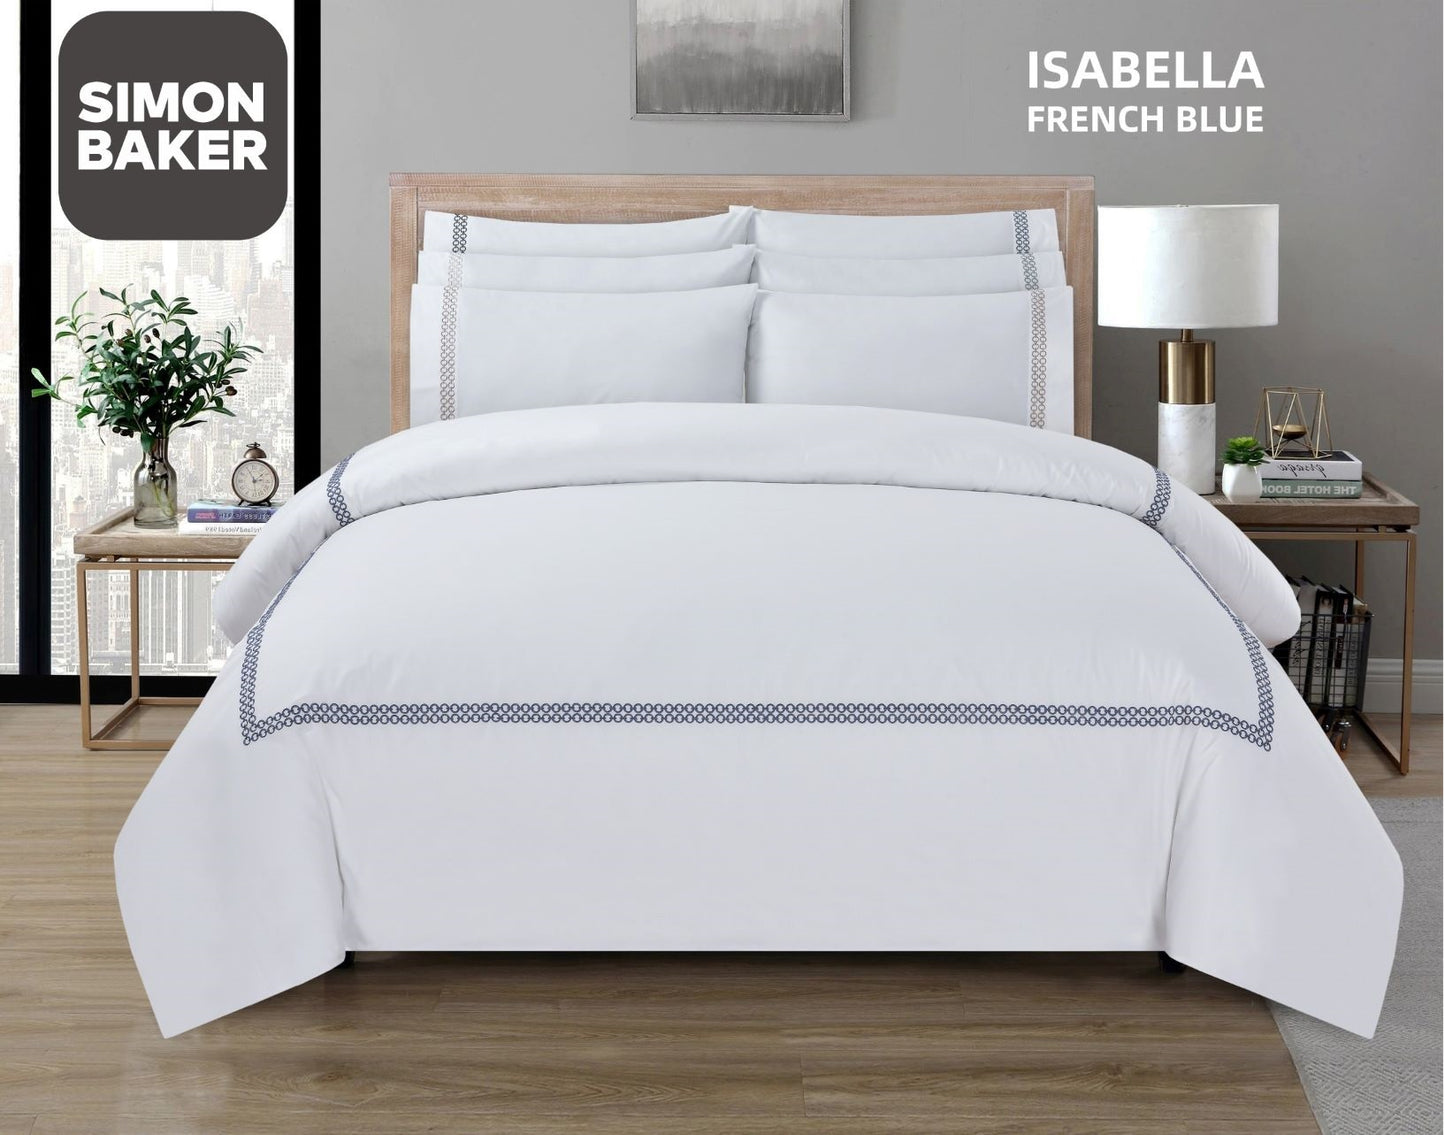 Simon Baker | T200 Cotton Percale Embroidered Duvet Cover Set - Isabella French Blue (Various Sizes)